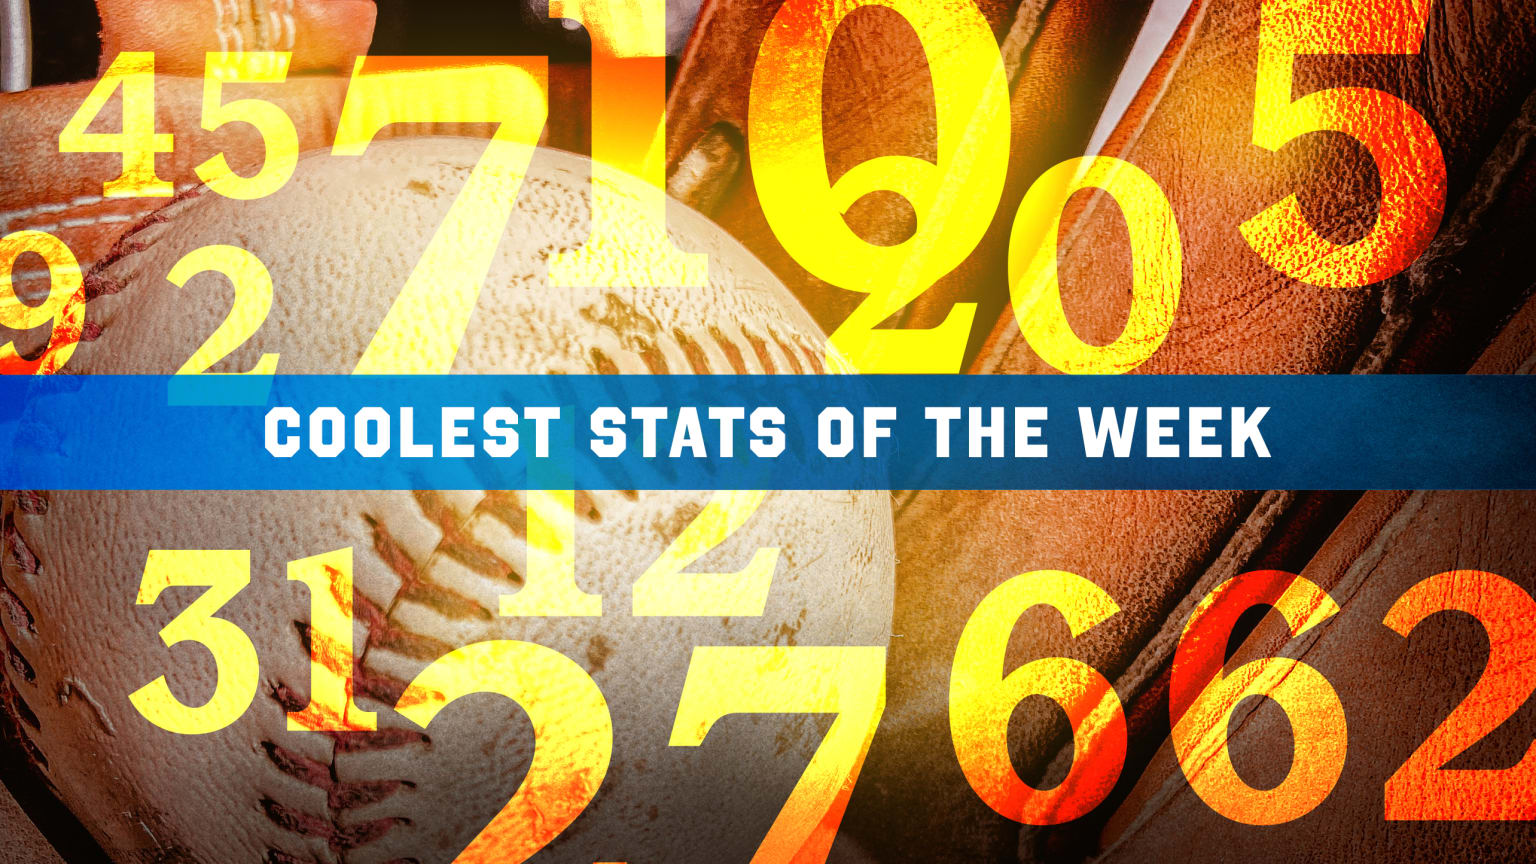 The words ''Coolest stats of the week'' amid yellow numerals over a ball in a glove